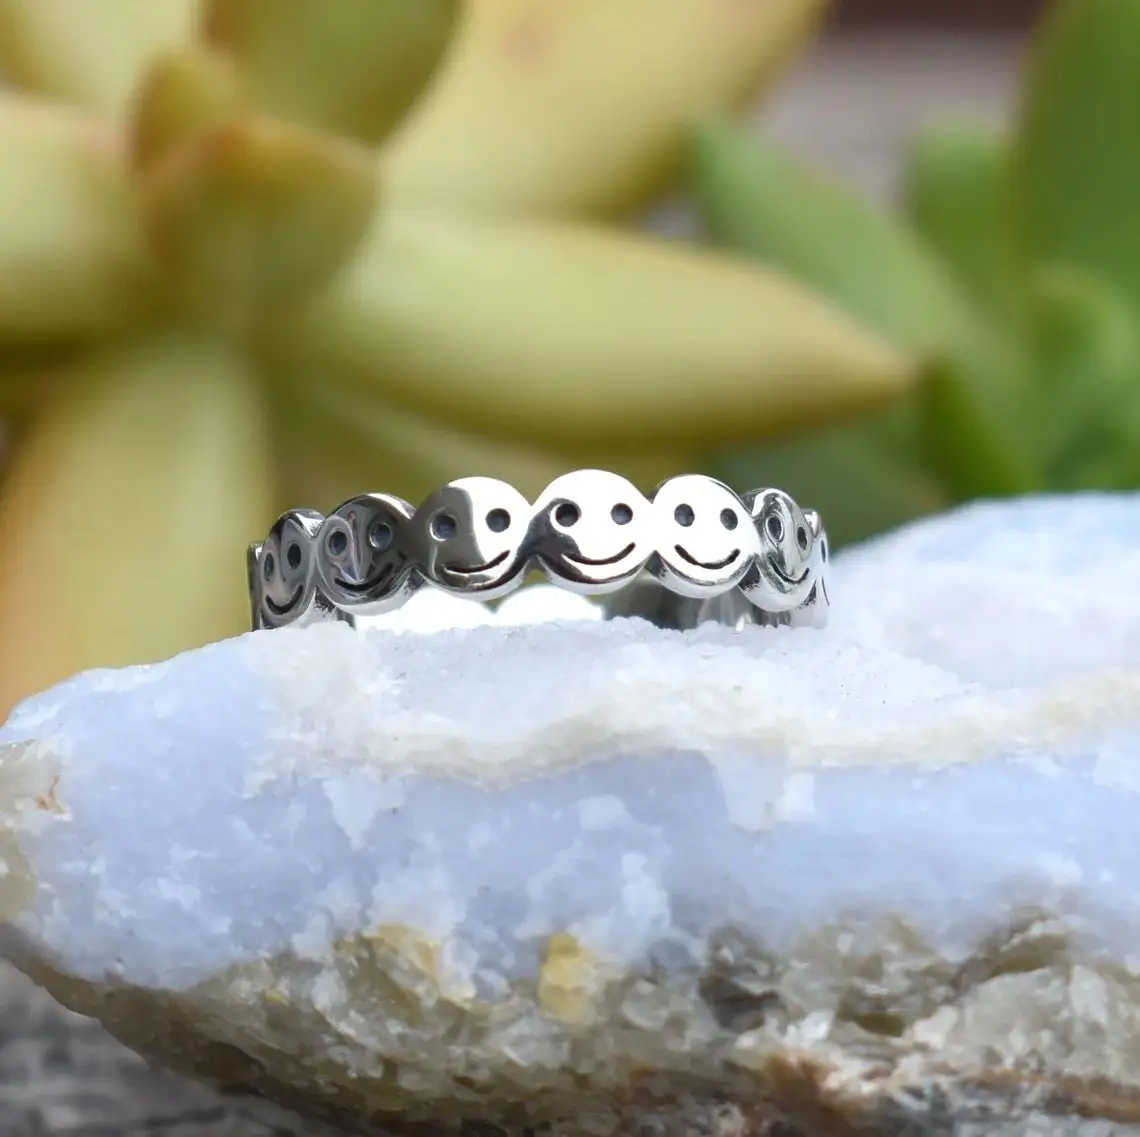 Fashion Jewelry Rings Stainless Steel Smile Face Ring for Men Women